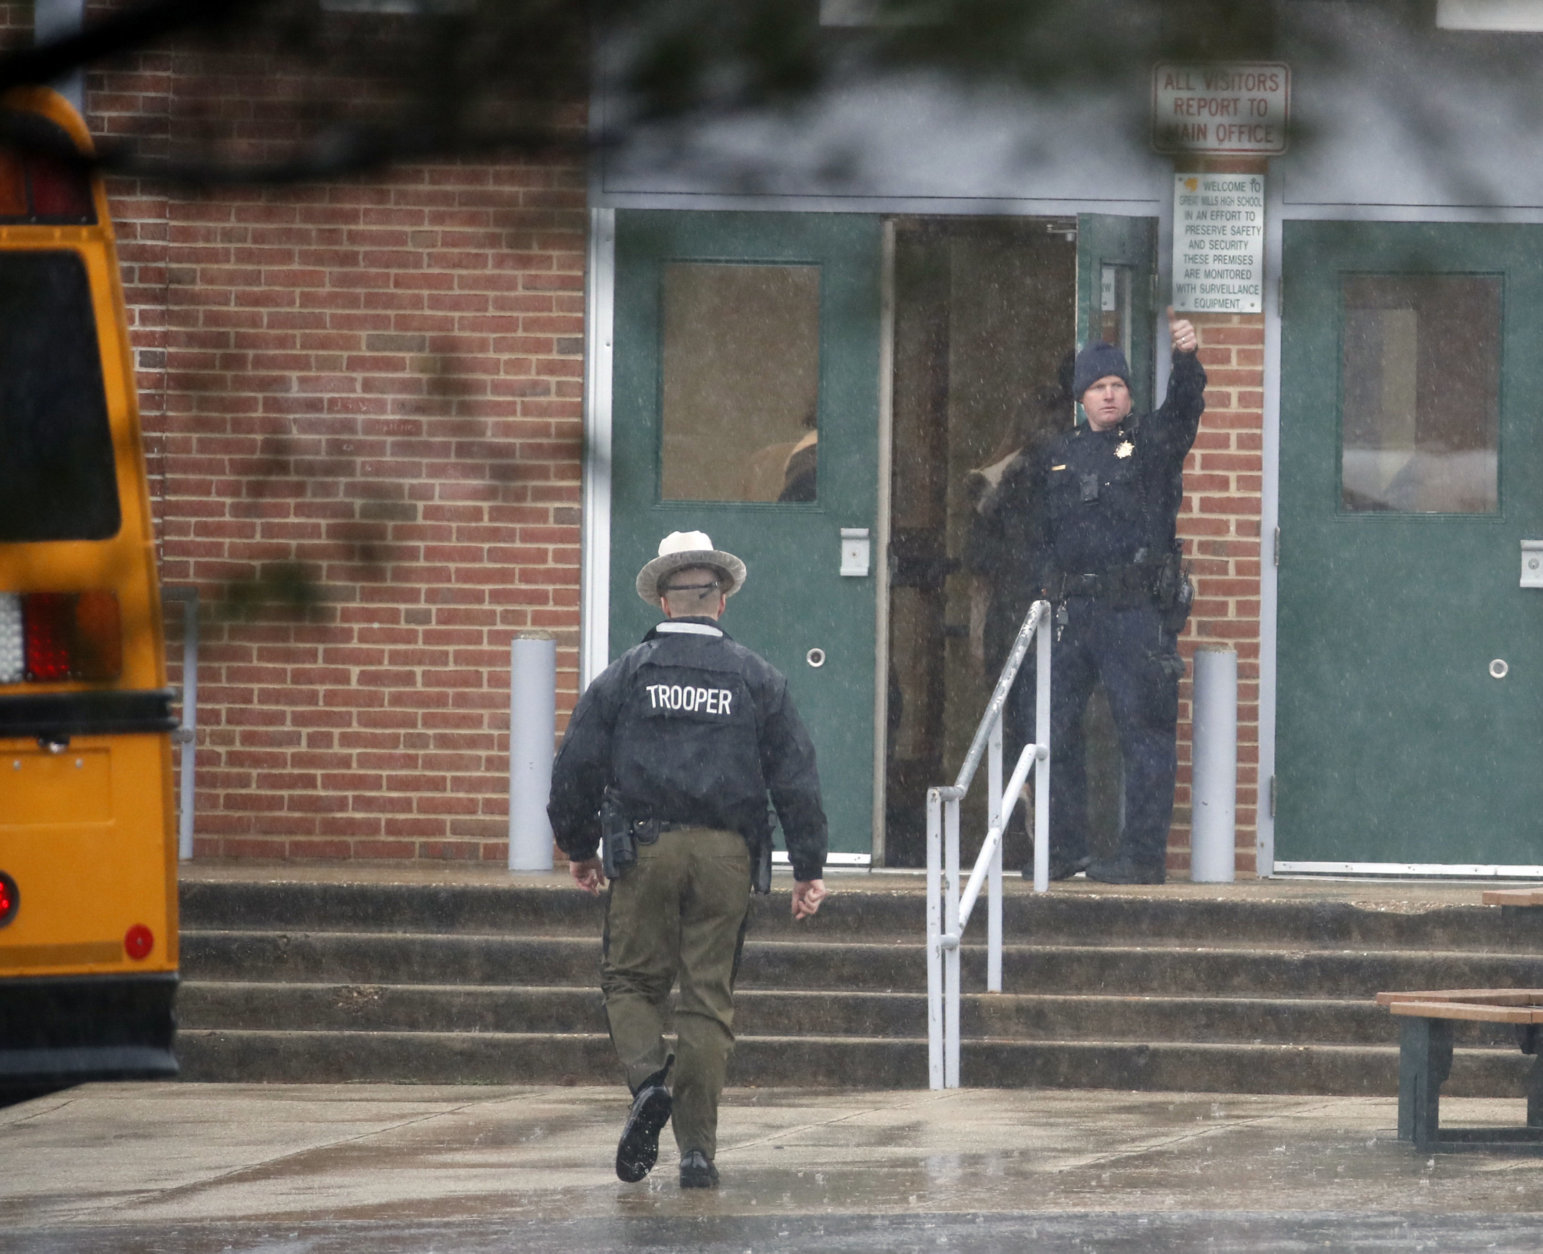 A policeman gives a thumbs-up after moving students into a different area of Great Mills High School, the scene of a shooting, Tuesday morning, March 20, 2018 in Great Mills, Md.  (AP Photo/Alex Brandon  )